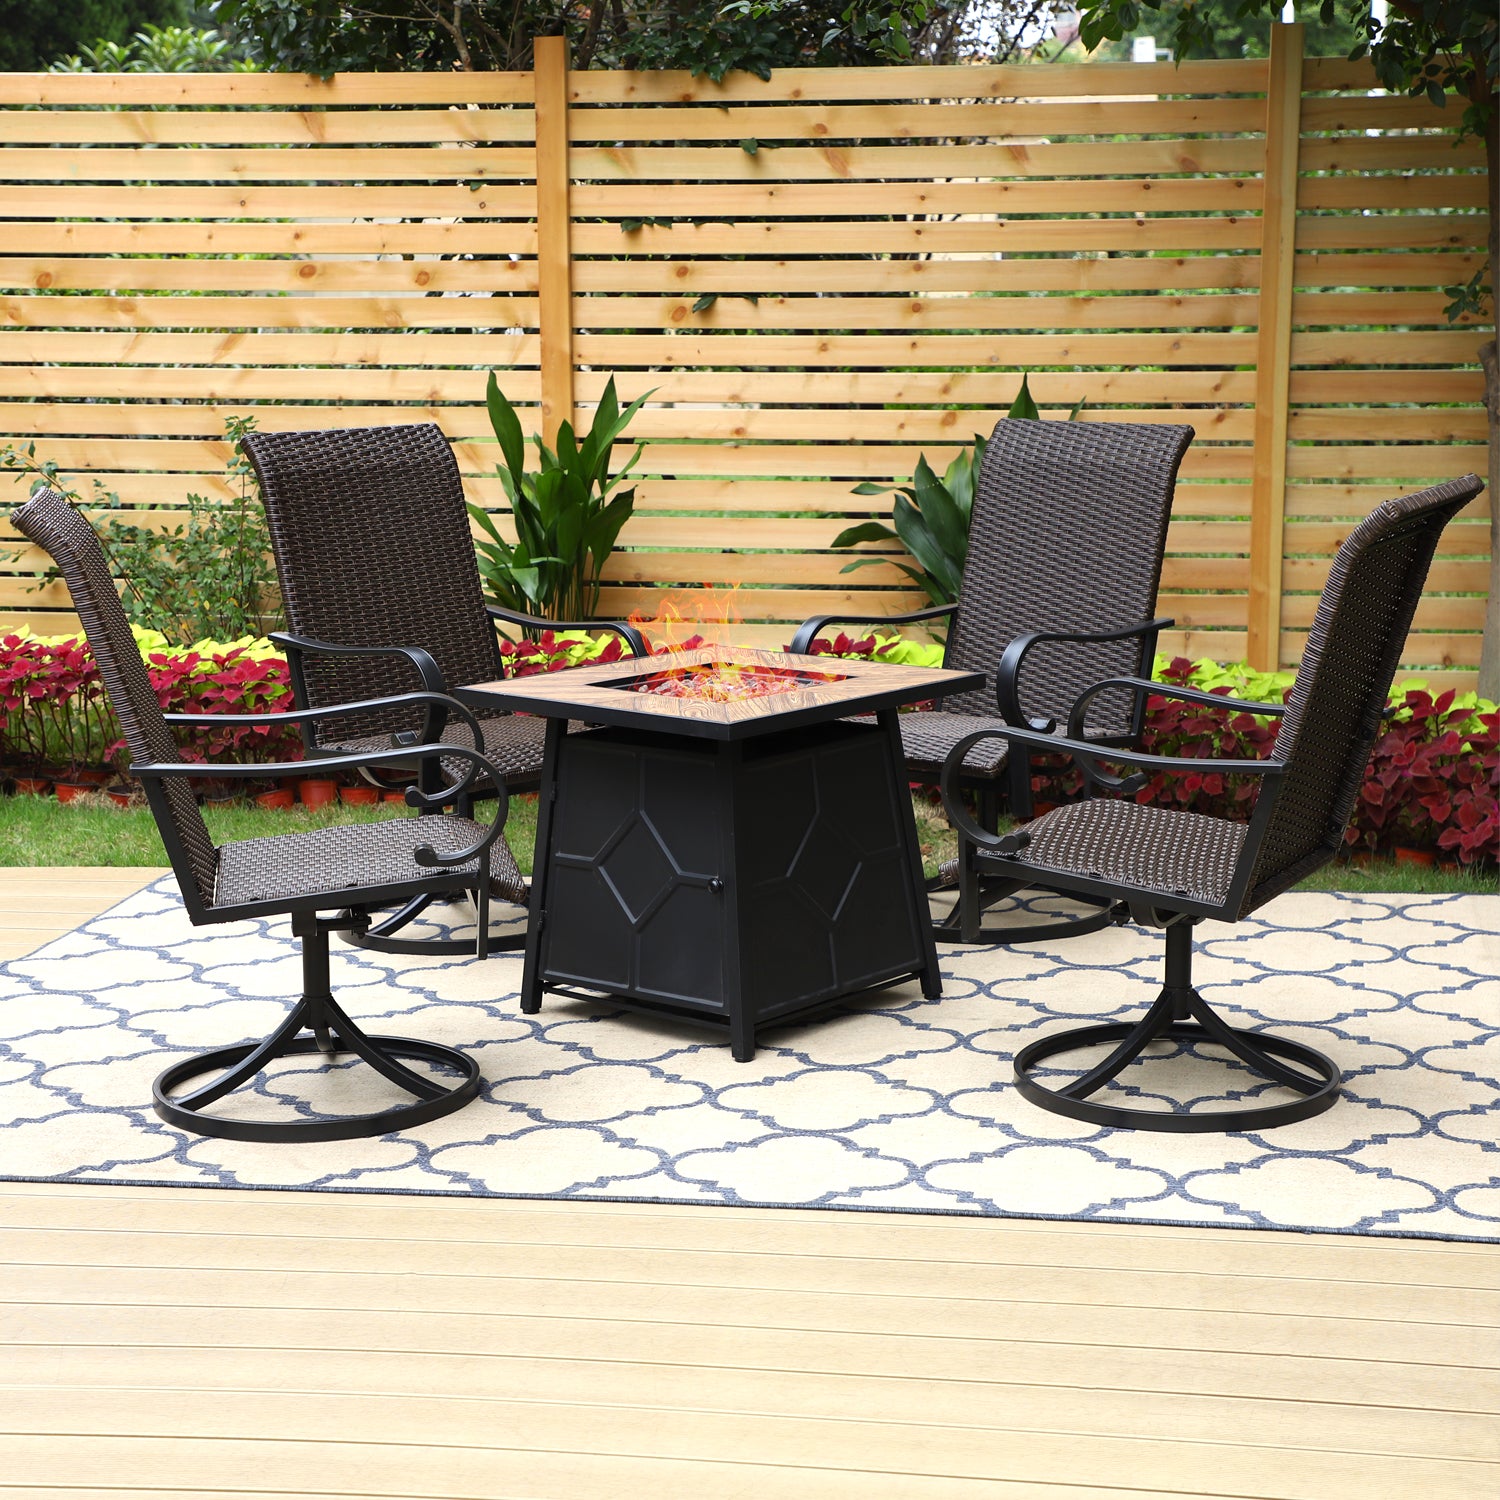 PHI VILLA 5-Piece TerraFab Fire Pit Table Patio Dining Set 28 Inch 40,000BTU Fire Pit Table & Classic Brown Rattan Chairs